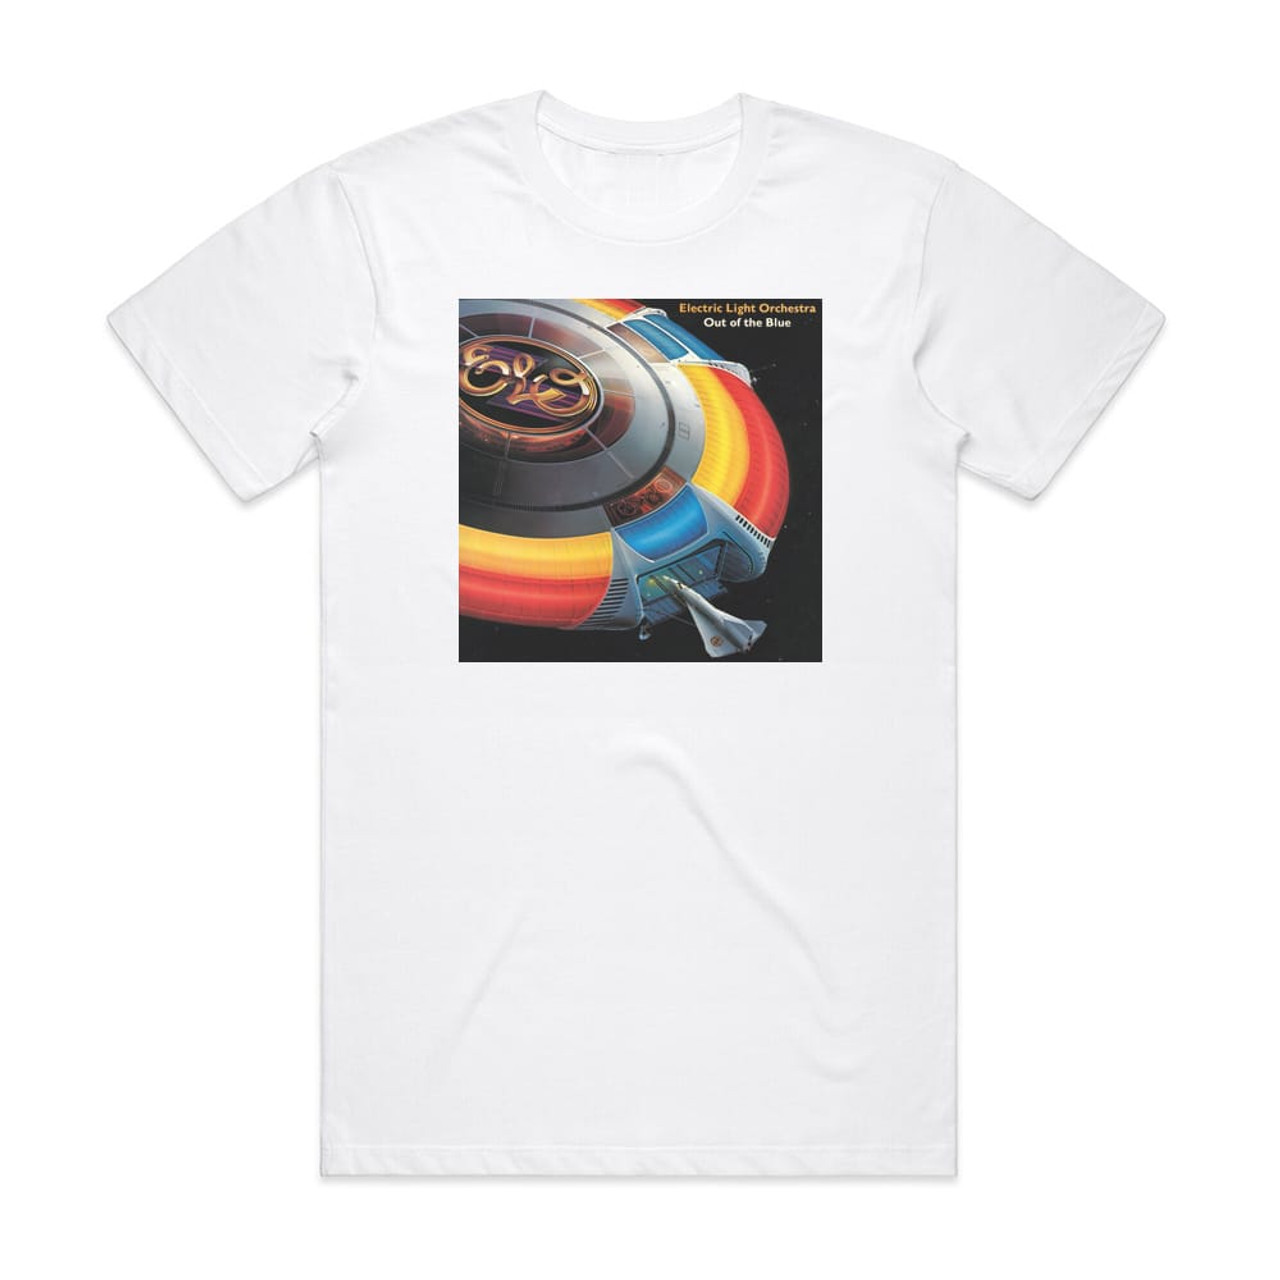 Electric Light Out Of The Blue Album Cover T-Shirt White